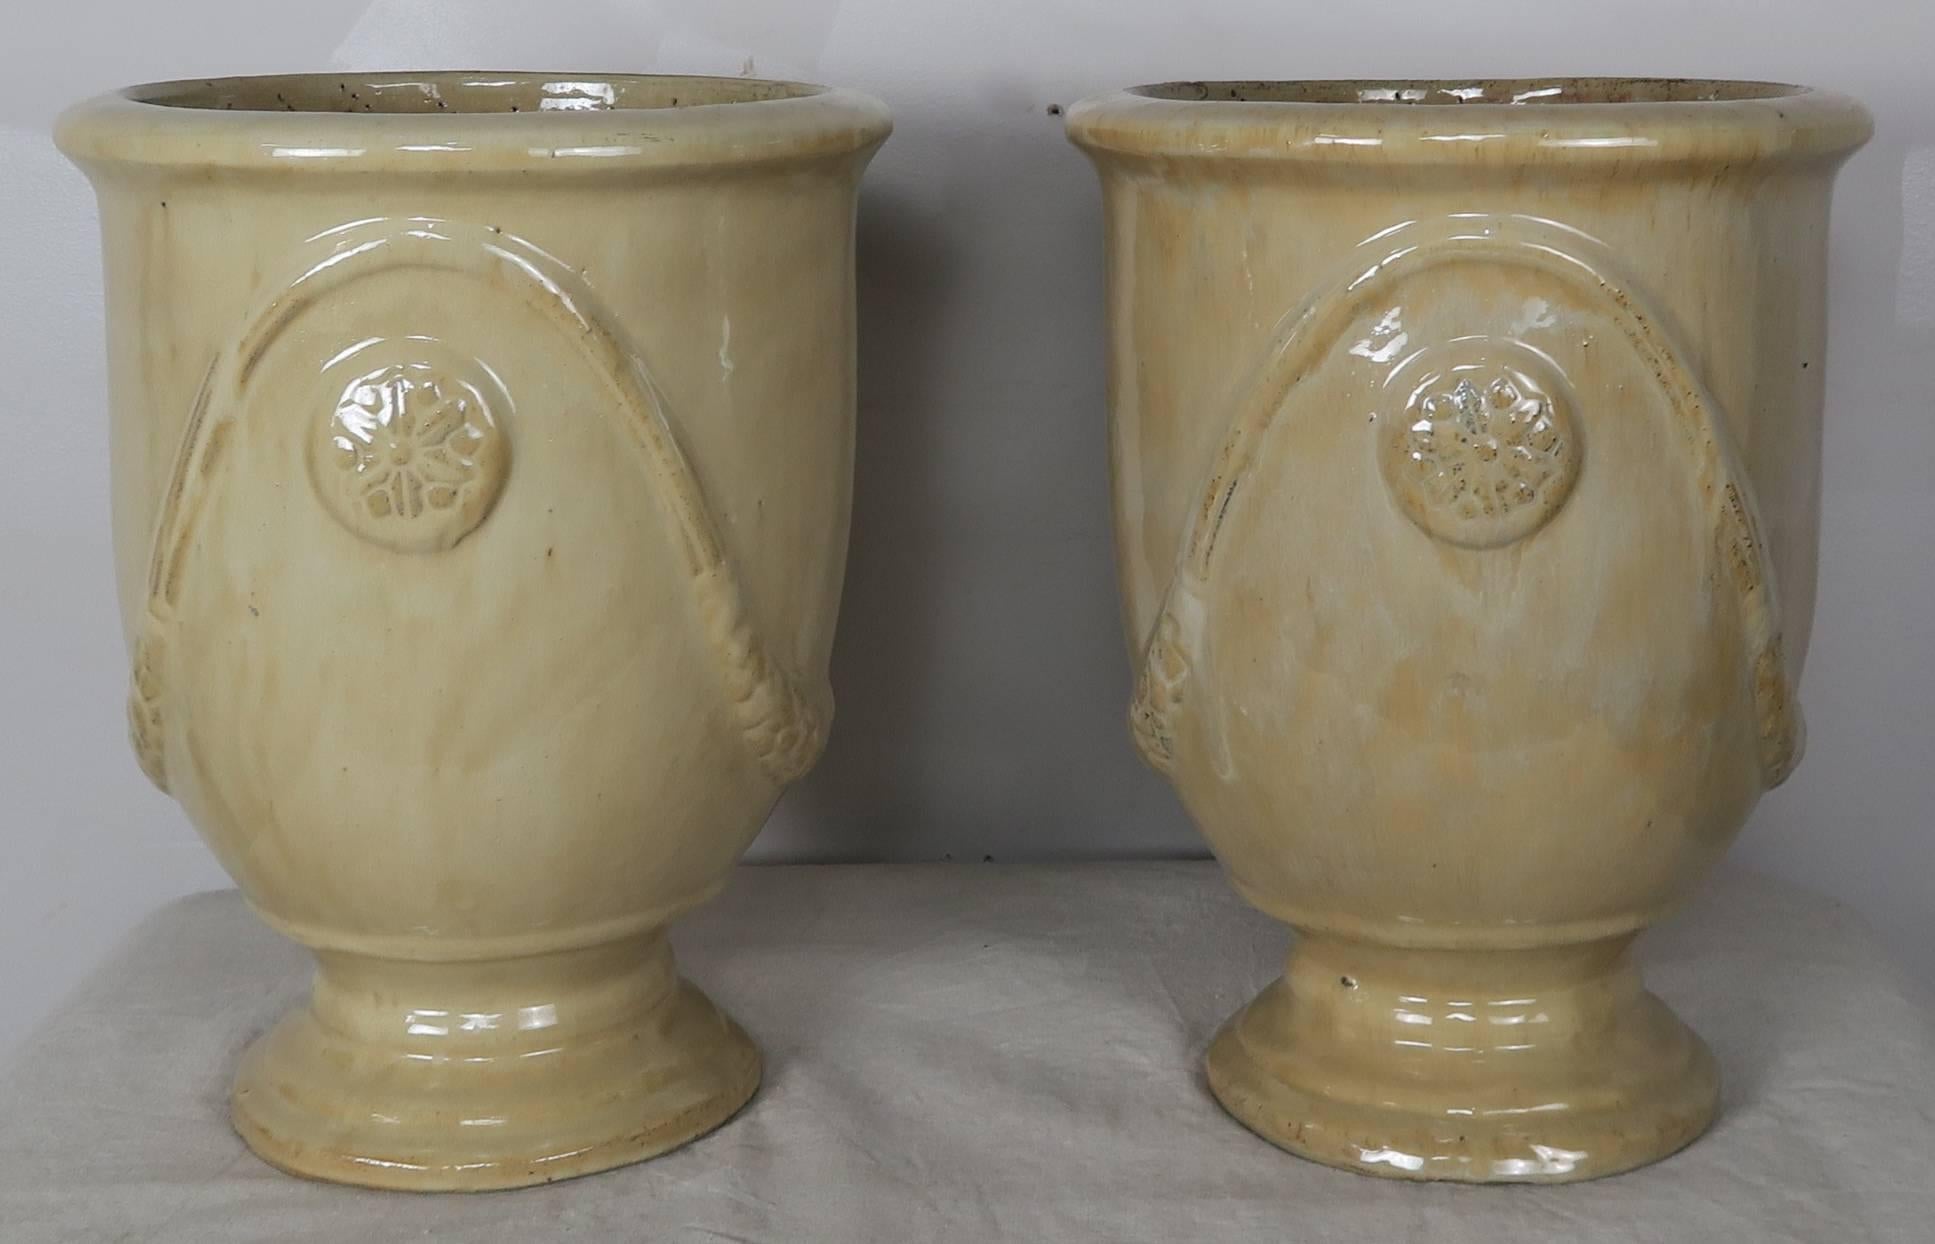 Pair of French glazed terra cotta pots in a soft buttercream yellow coloration.
 